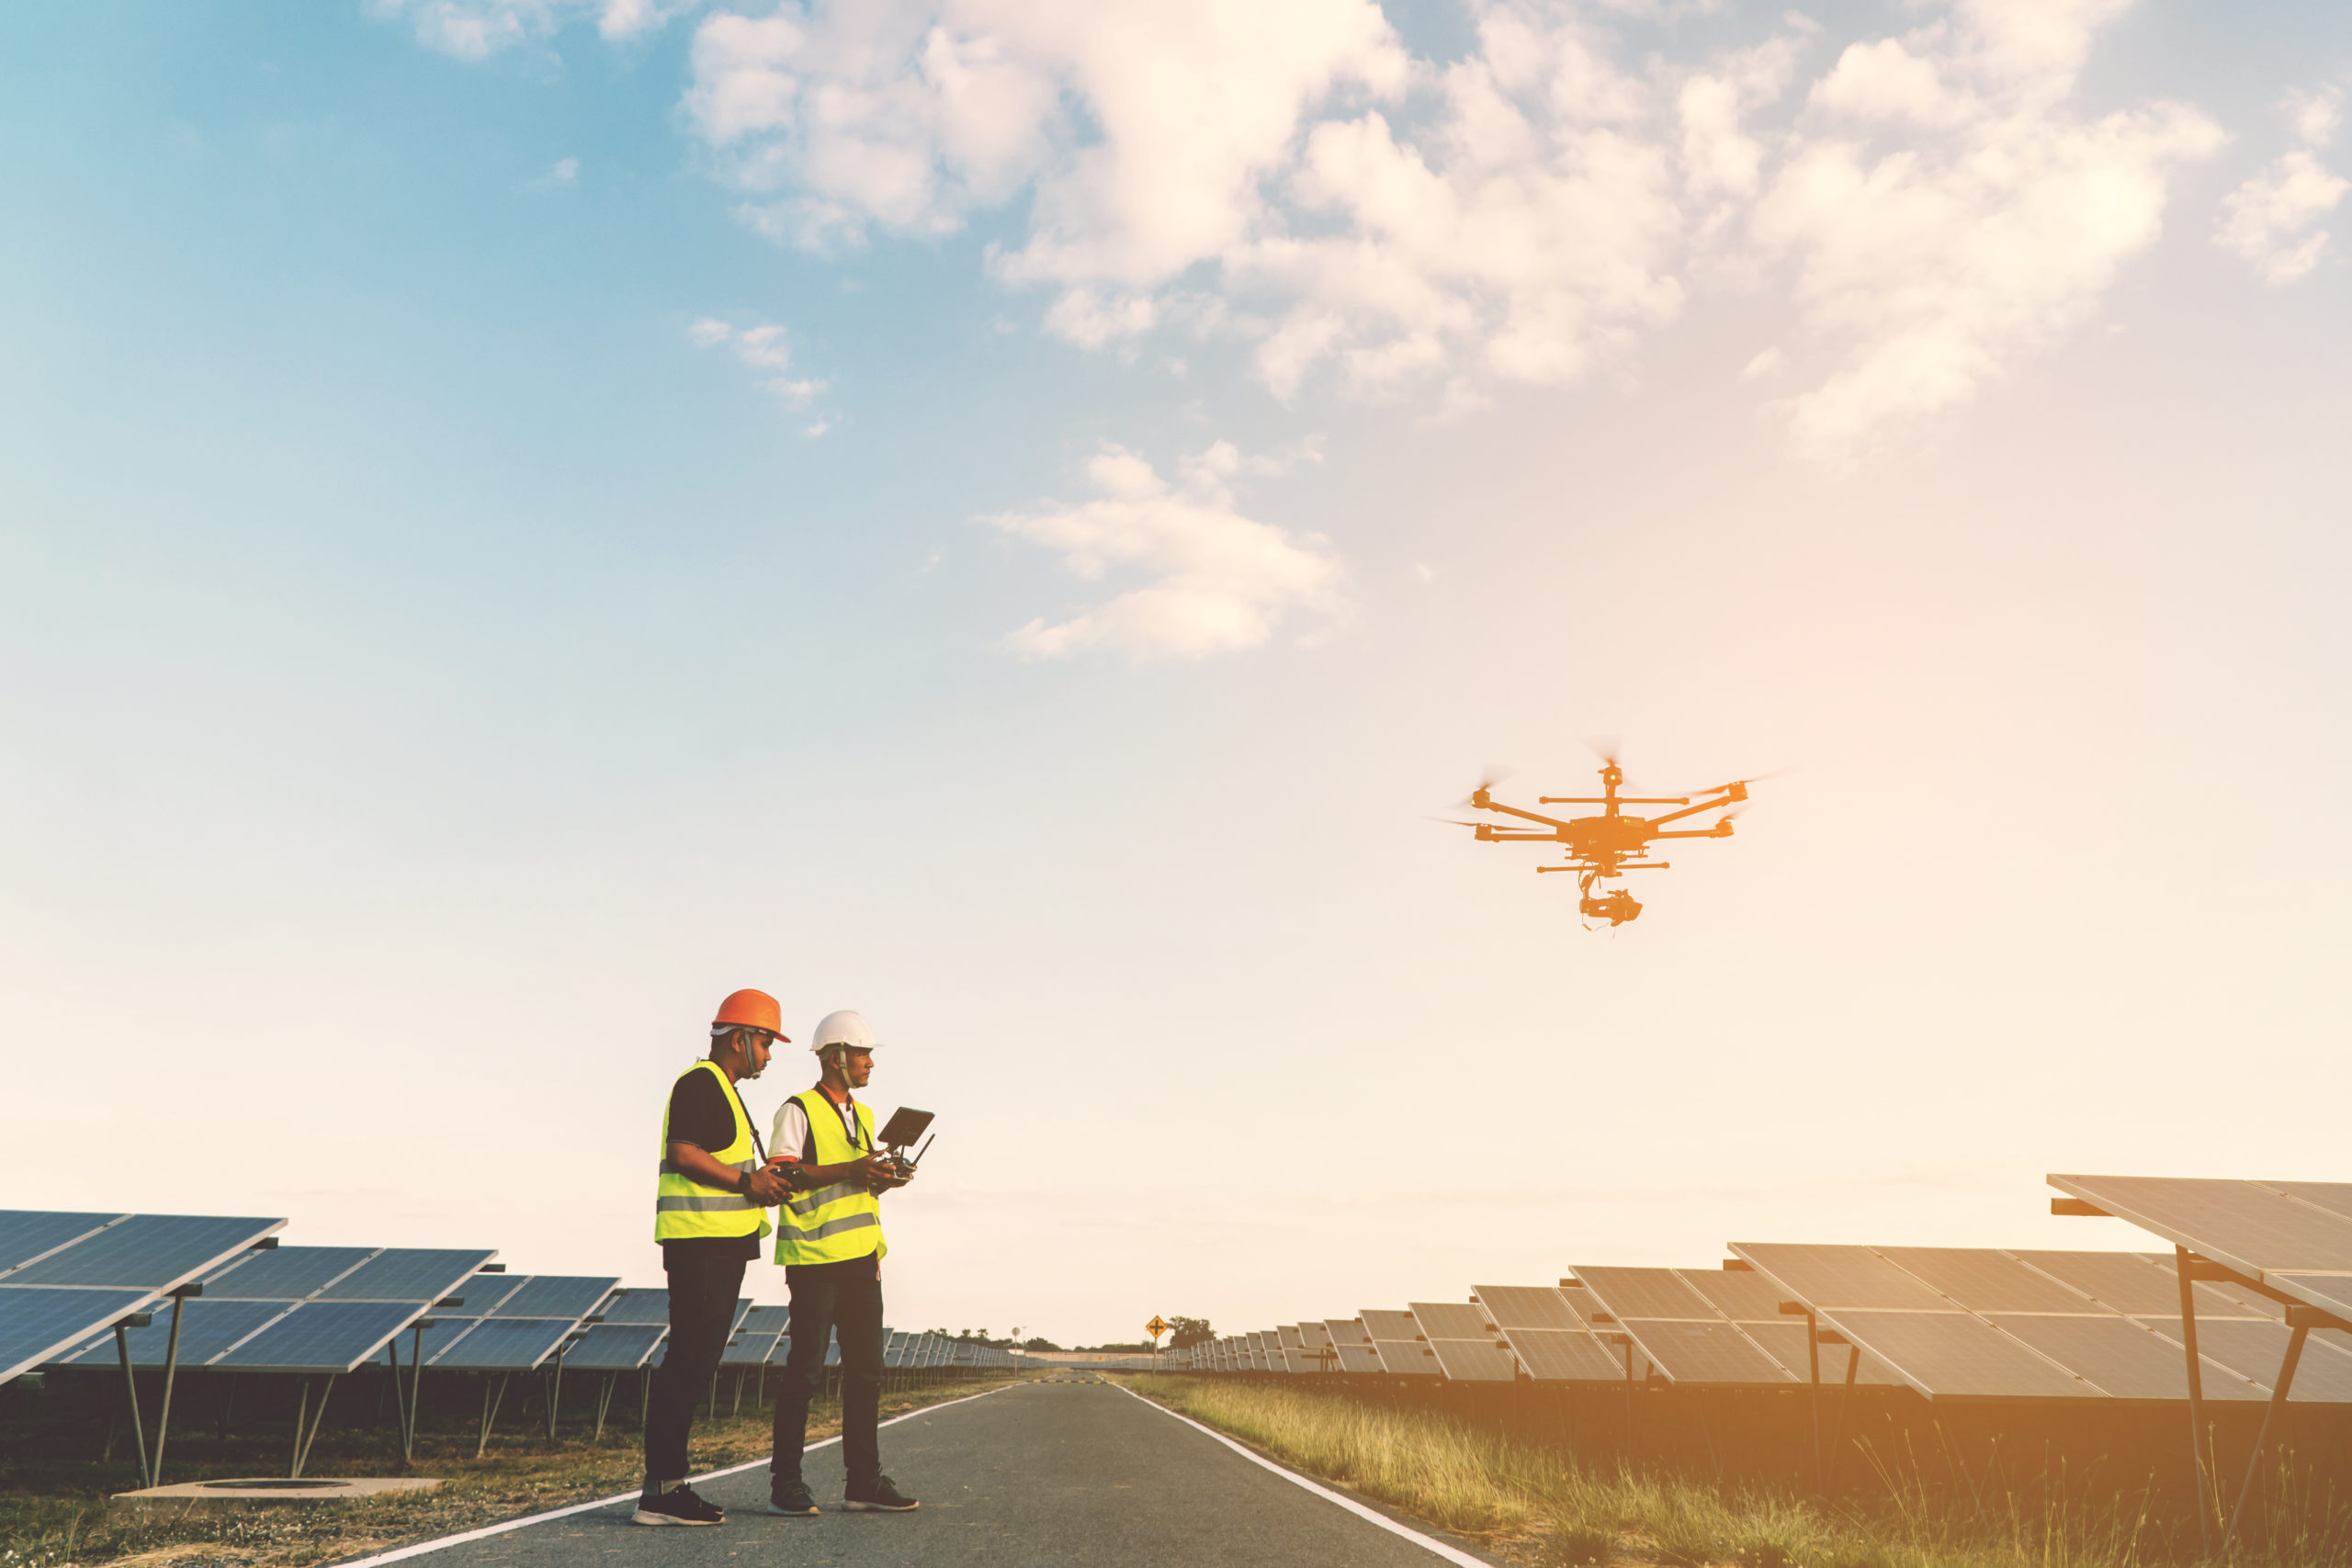 Two pilots performing a drone inspection on a solar site to capture premium datam